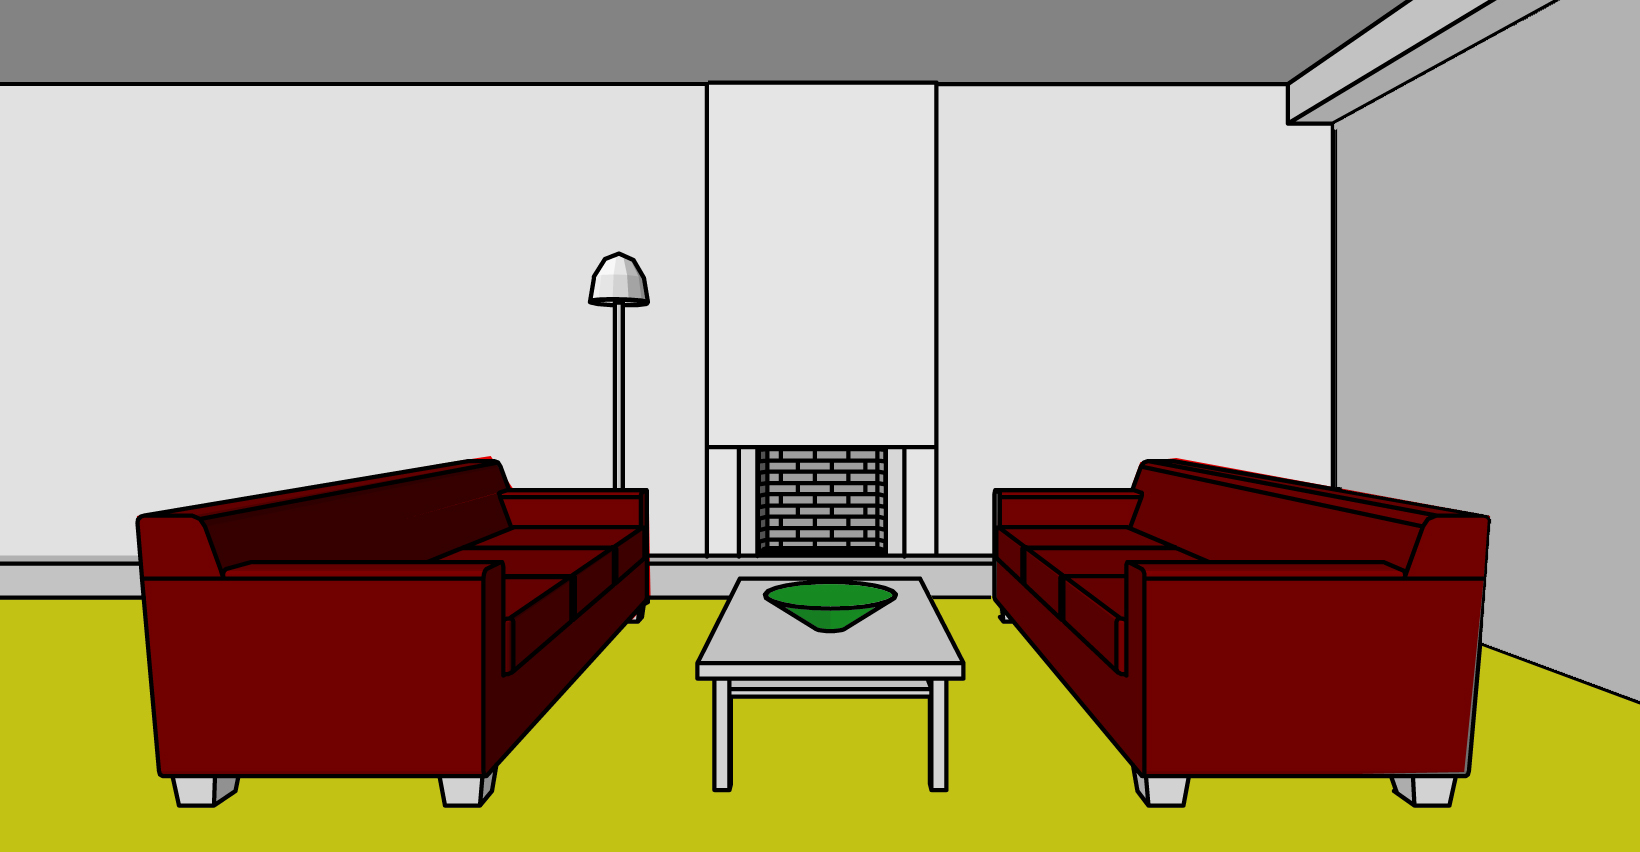 Faca to face sofa arrangement.parallel sofa arrangement, living room arrangement, living room images, living room drawings, perspective living room drawing